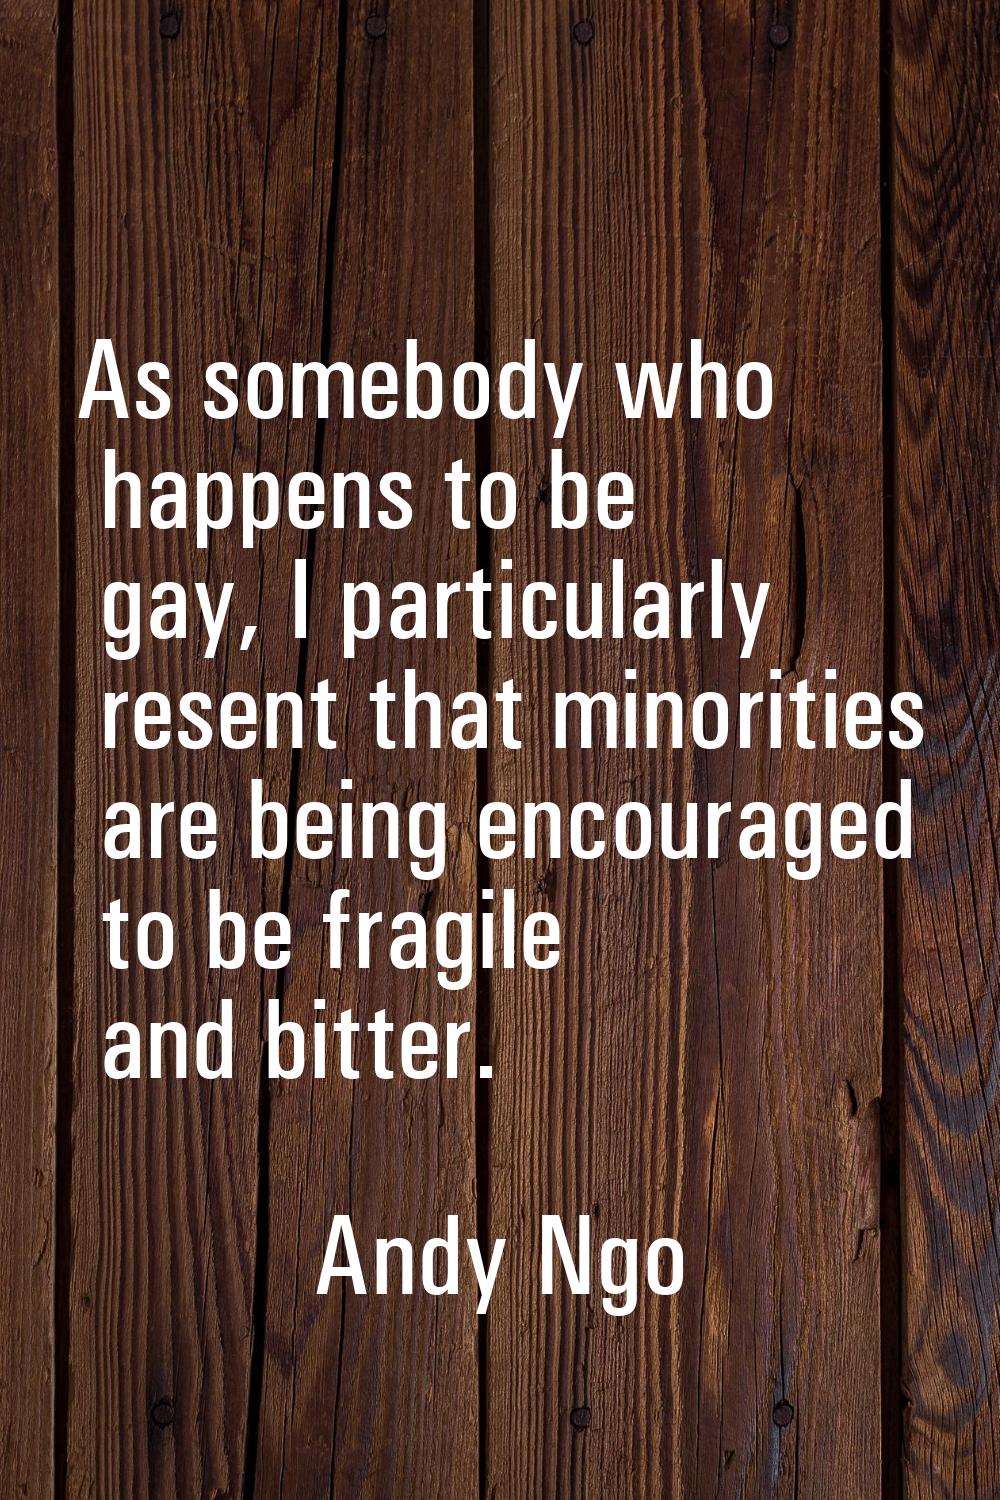 As somebody who happens to be gay, I particularly resent that minorities are being encouraged to be